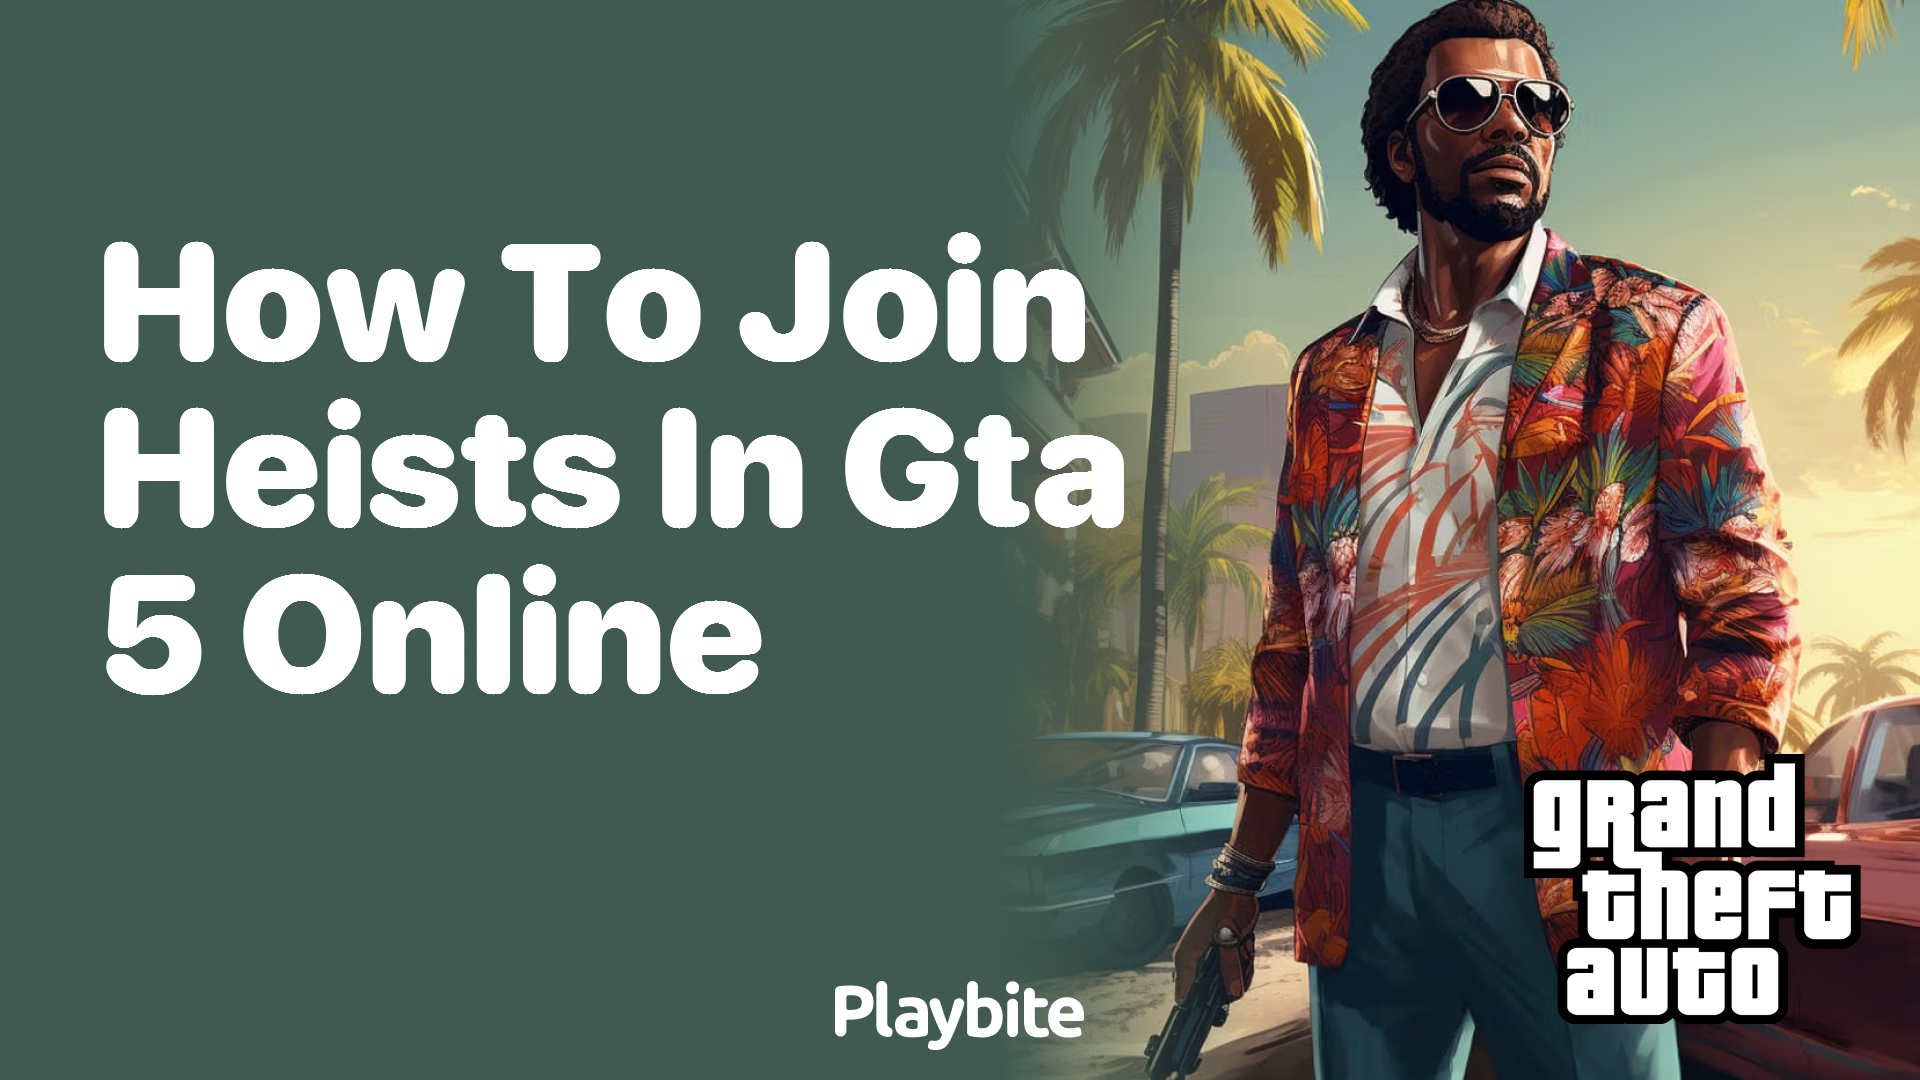 How to Join Heists in GTA 5 Online